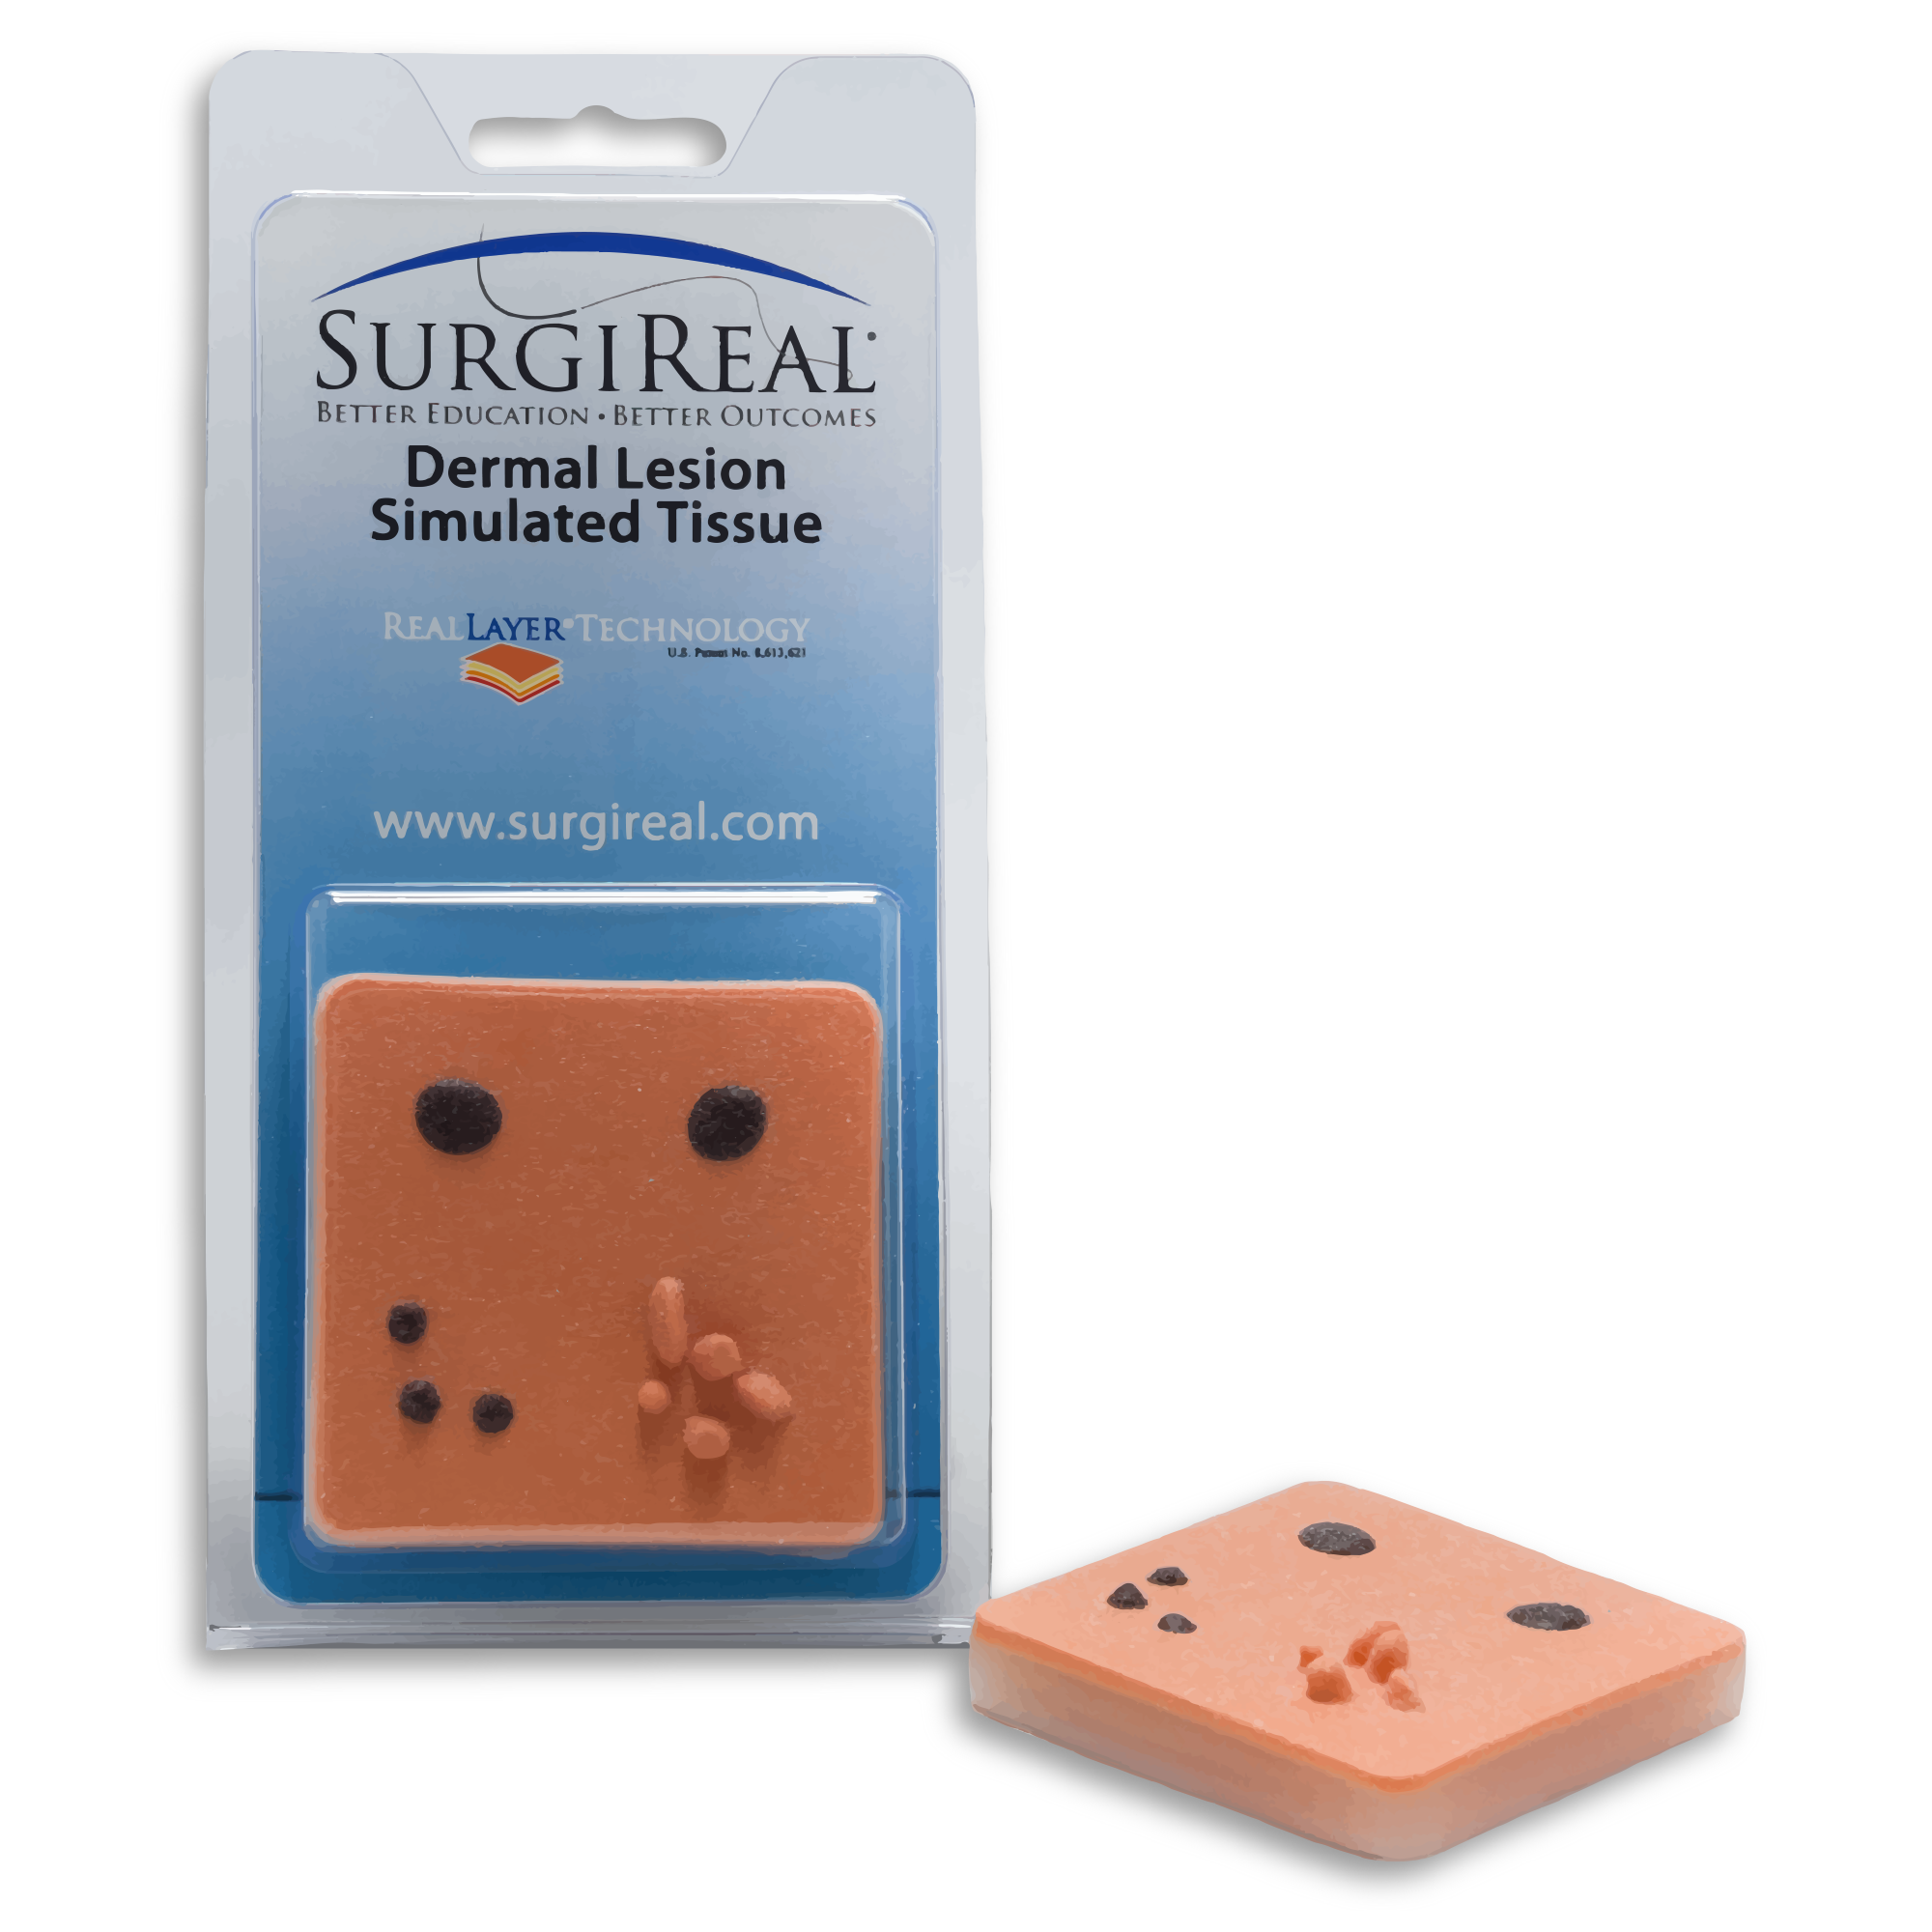 Dermal Lesion Simulated Tissue Pad from SurgiReal includes a number of mole and skin tags for students to practice removing and suturing the skin after removal